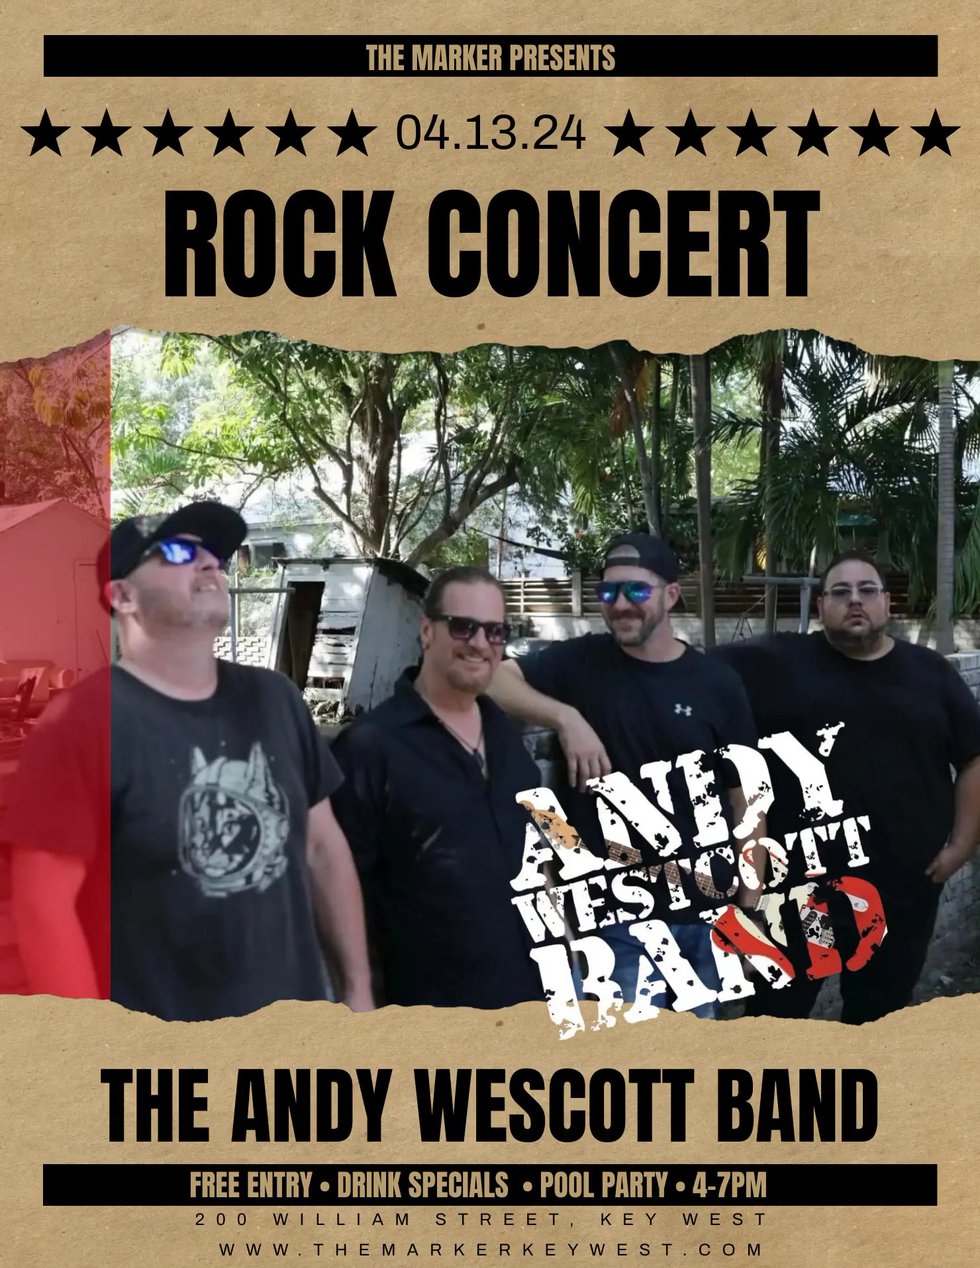 The Andy Westcott Band Concert at The Marker Key West Harbor Resort